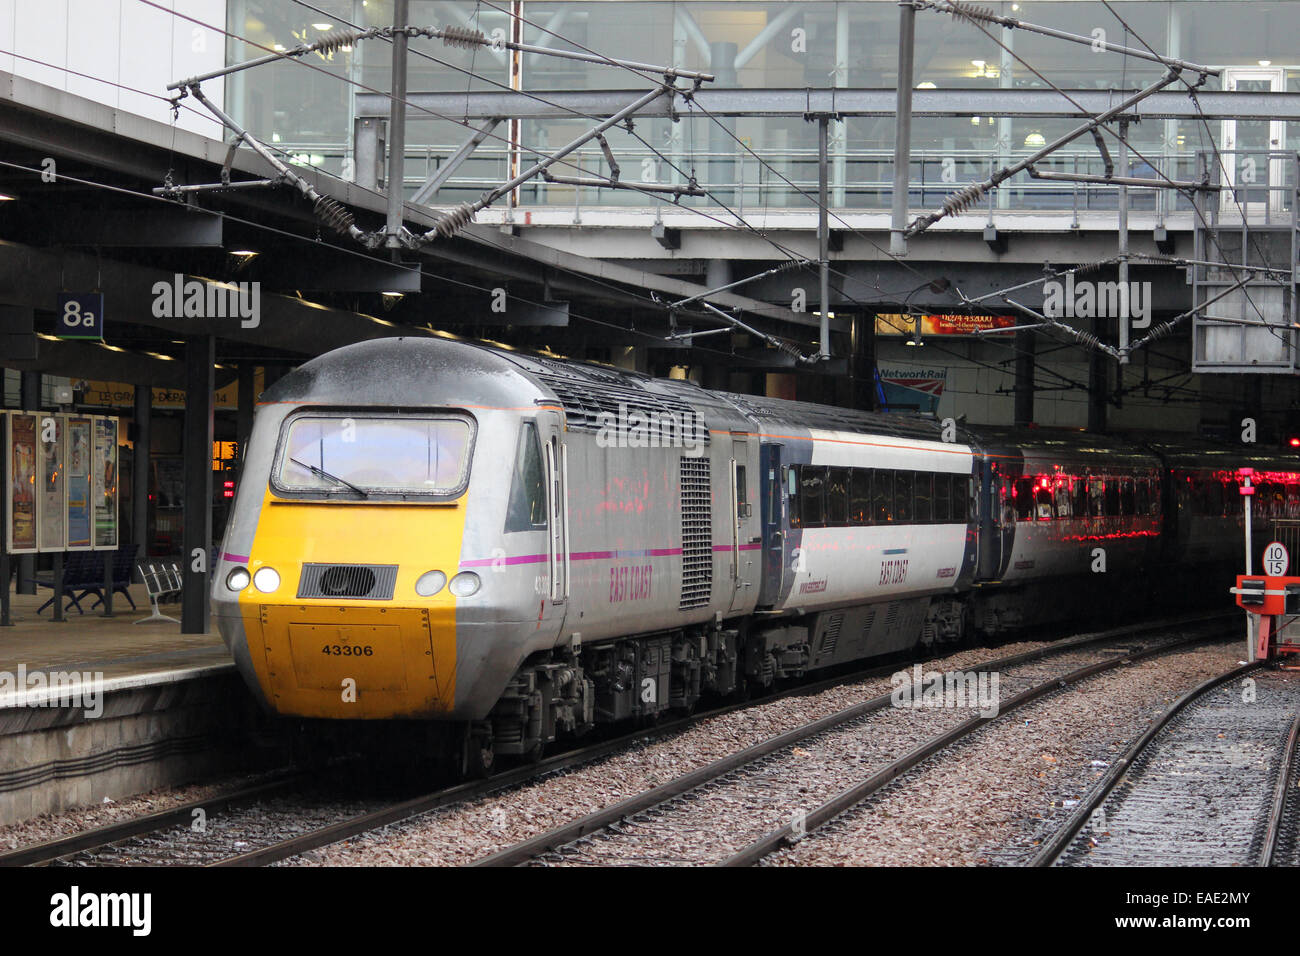 Power car number 43306 and front coaches of a high speed train in East Coast livery at platform 8a Leeds railway station. Stock Photo